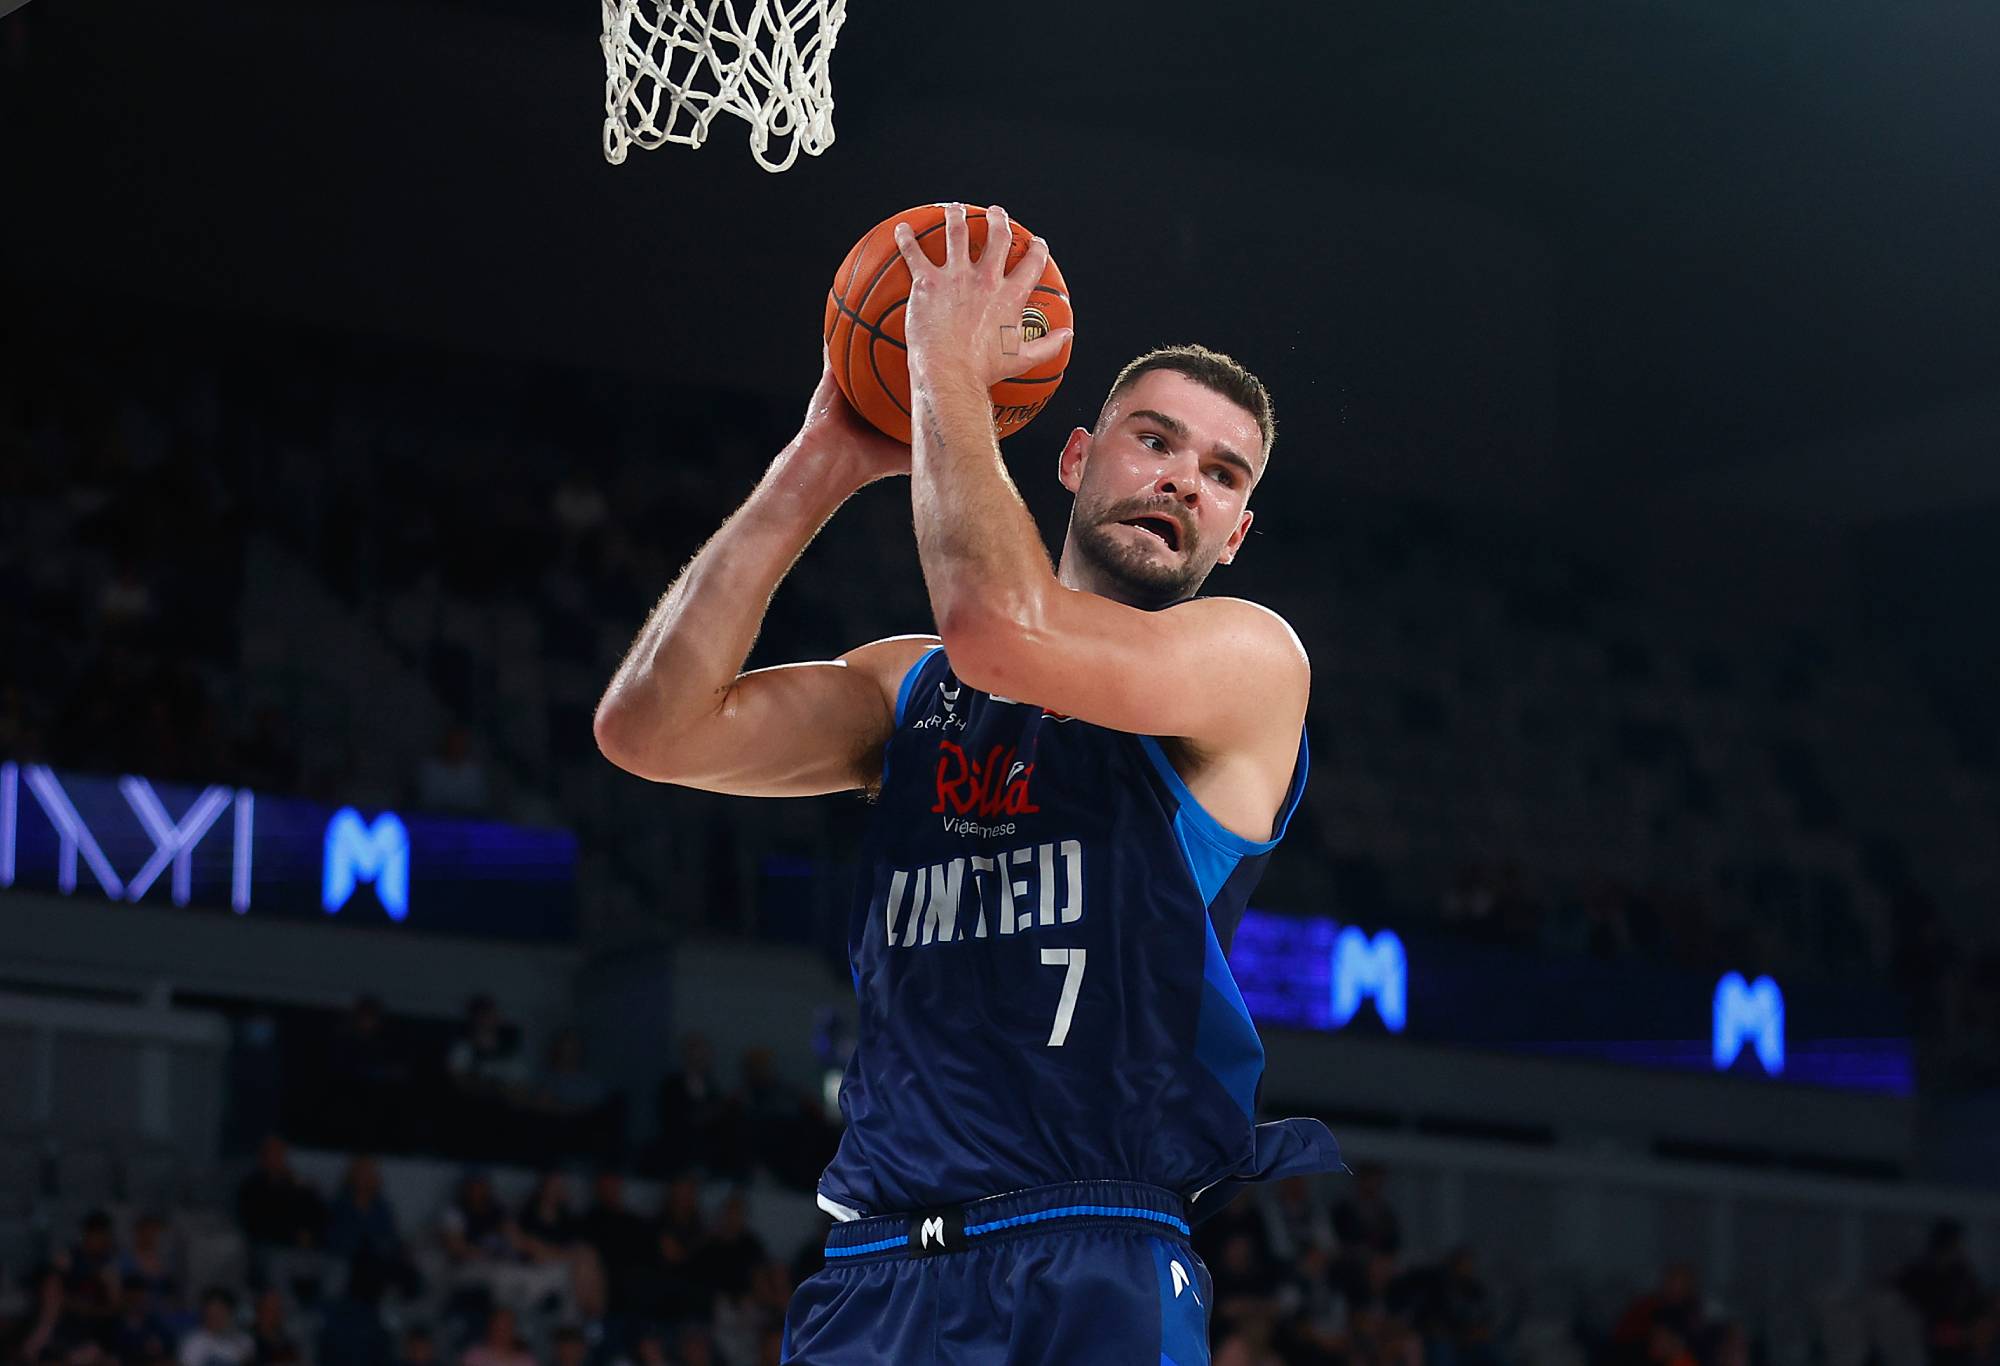 MELBOURNE, AUSTRALIA - OCTOBER 20: Isaac Humphries of United rebounds during the round four NBL match between Melbourne United and Cairns Taipans at John Cain Arena, on October 20, 2022, in Melbourne, Australia. (Photo by Daniel Pockett/Getty Images)